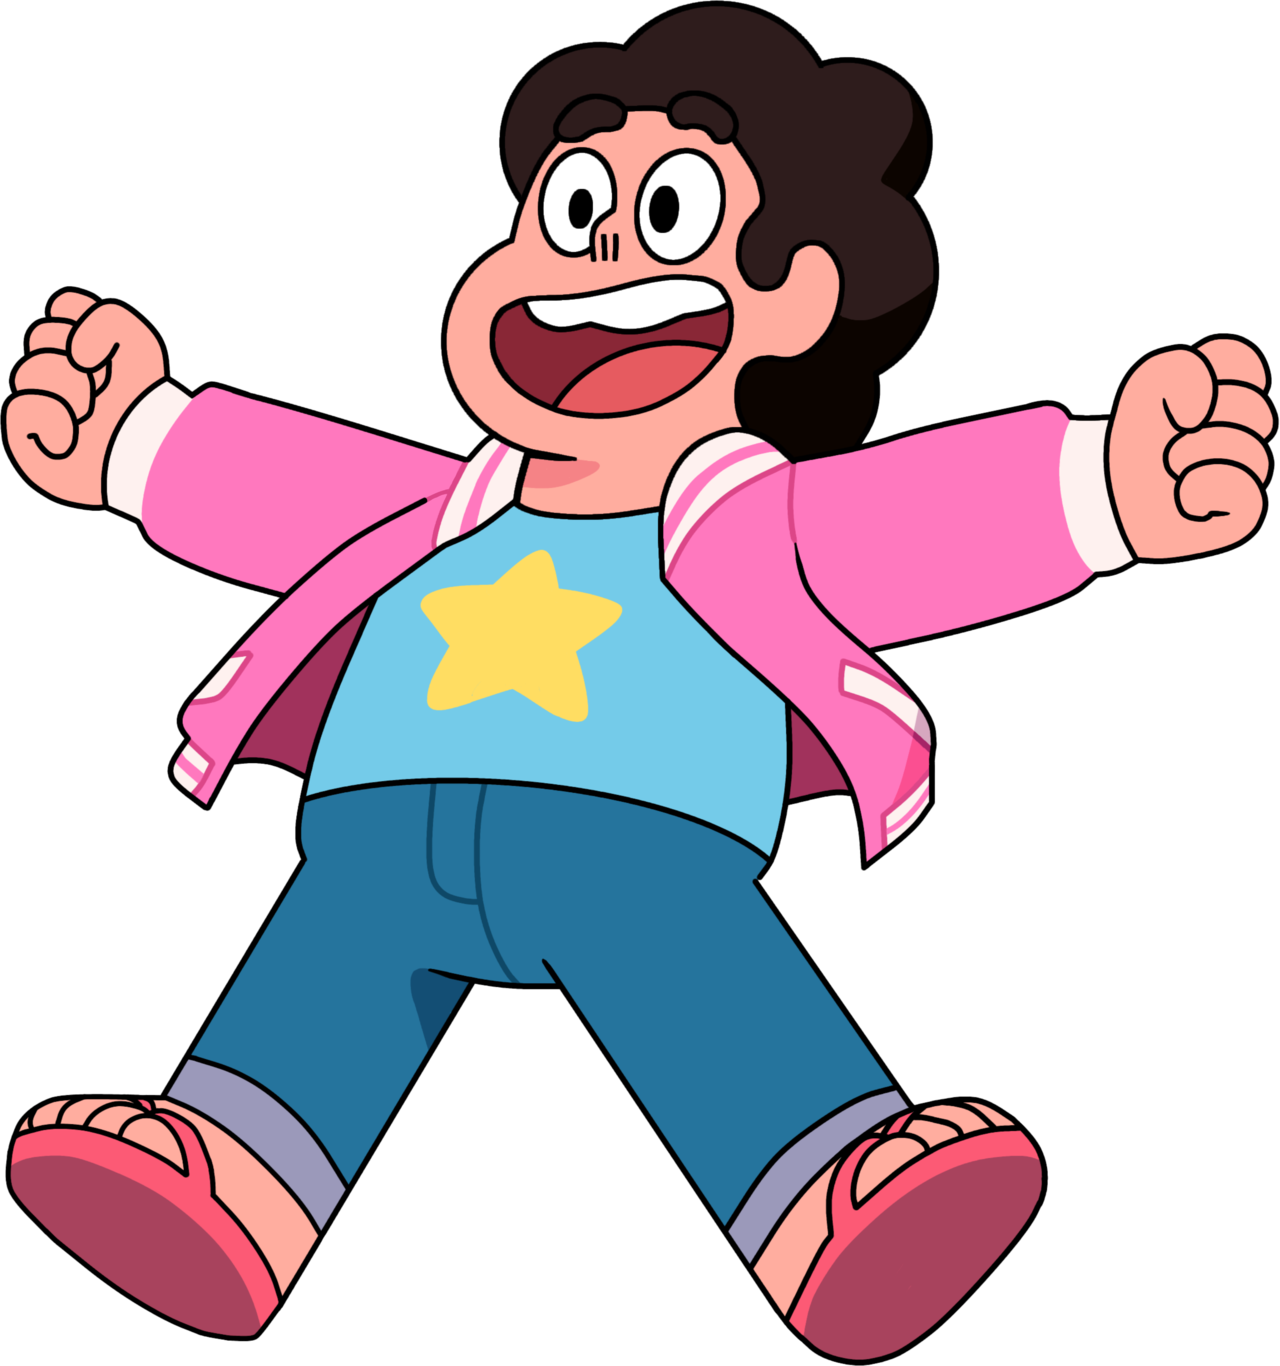 Universe Picture Cartoon Steven Download Free Image PNG Image